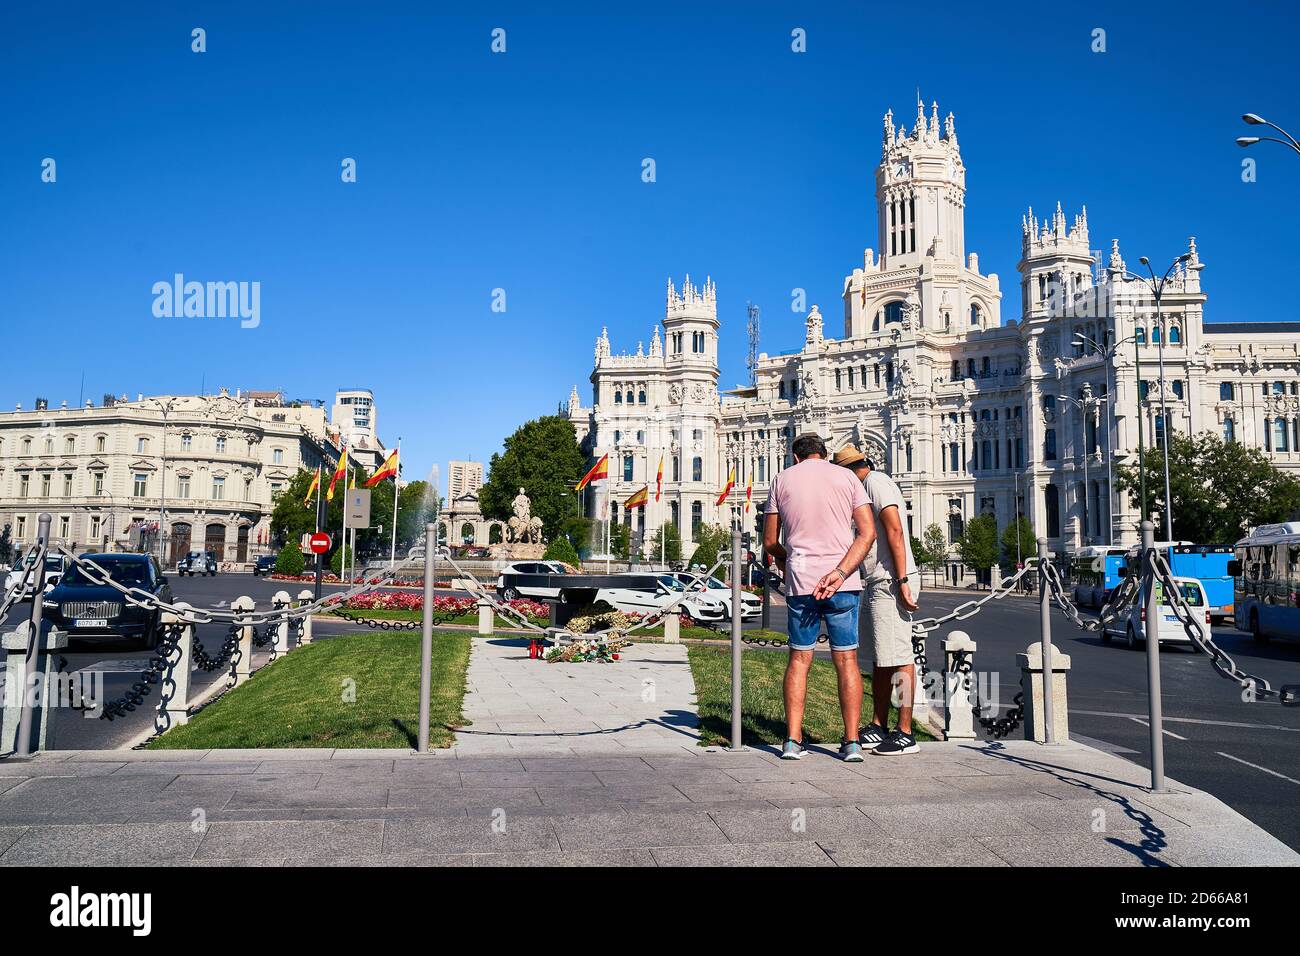 Two men in shorts look at the COVID-19 victim memorial flame at Cibeles Palace of communications, Madrid, August 2020 Stock Photo